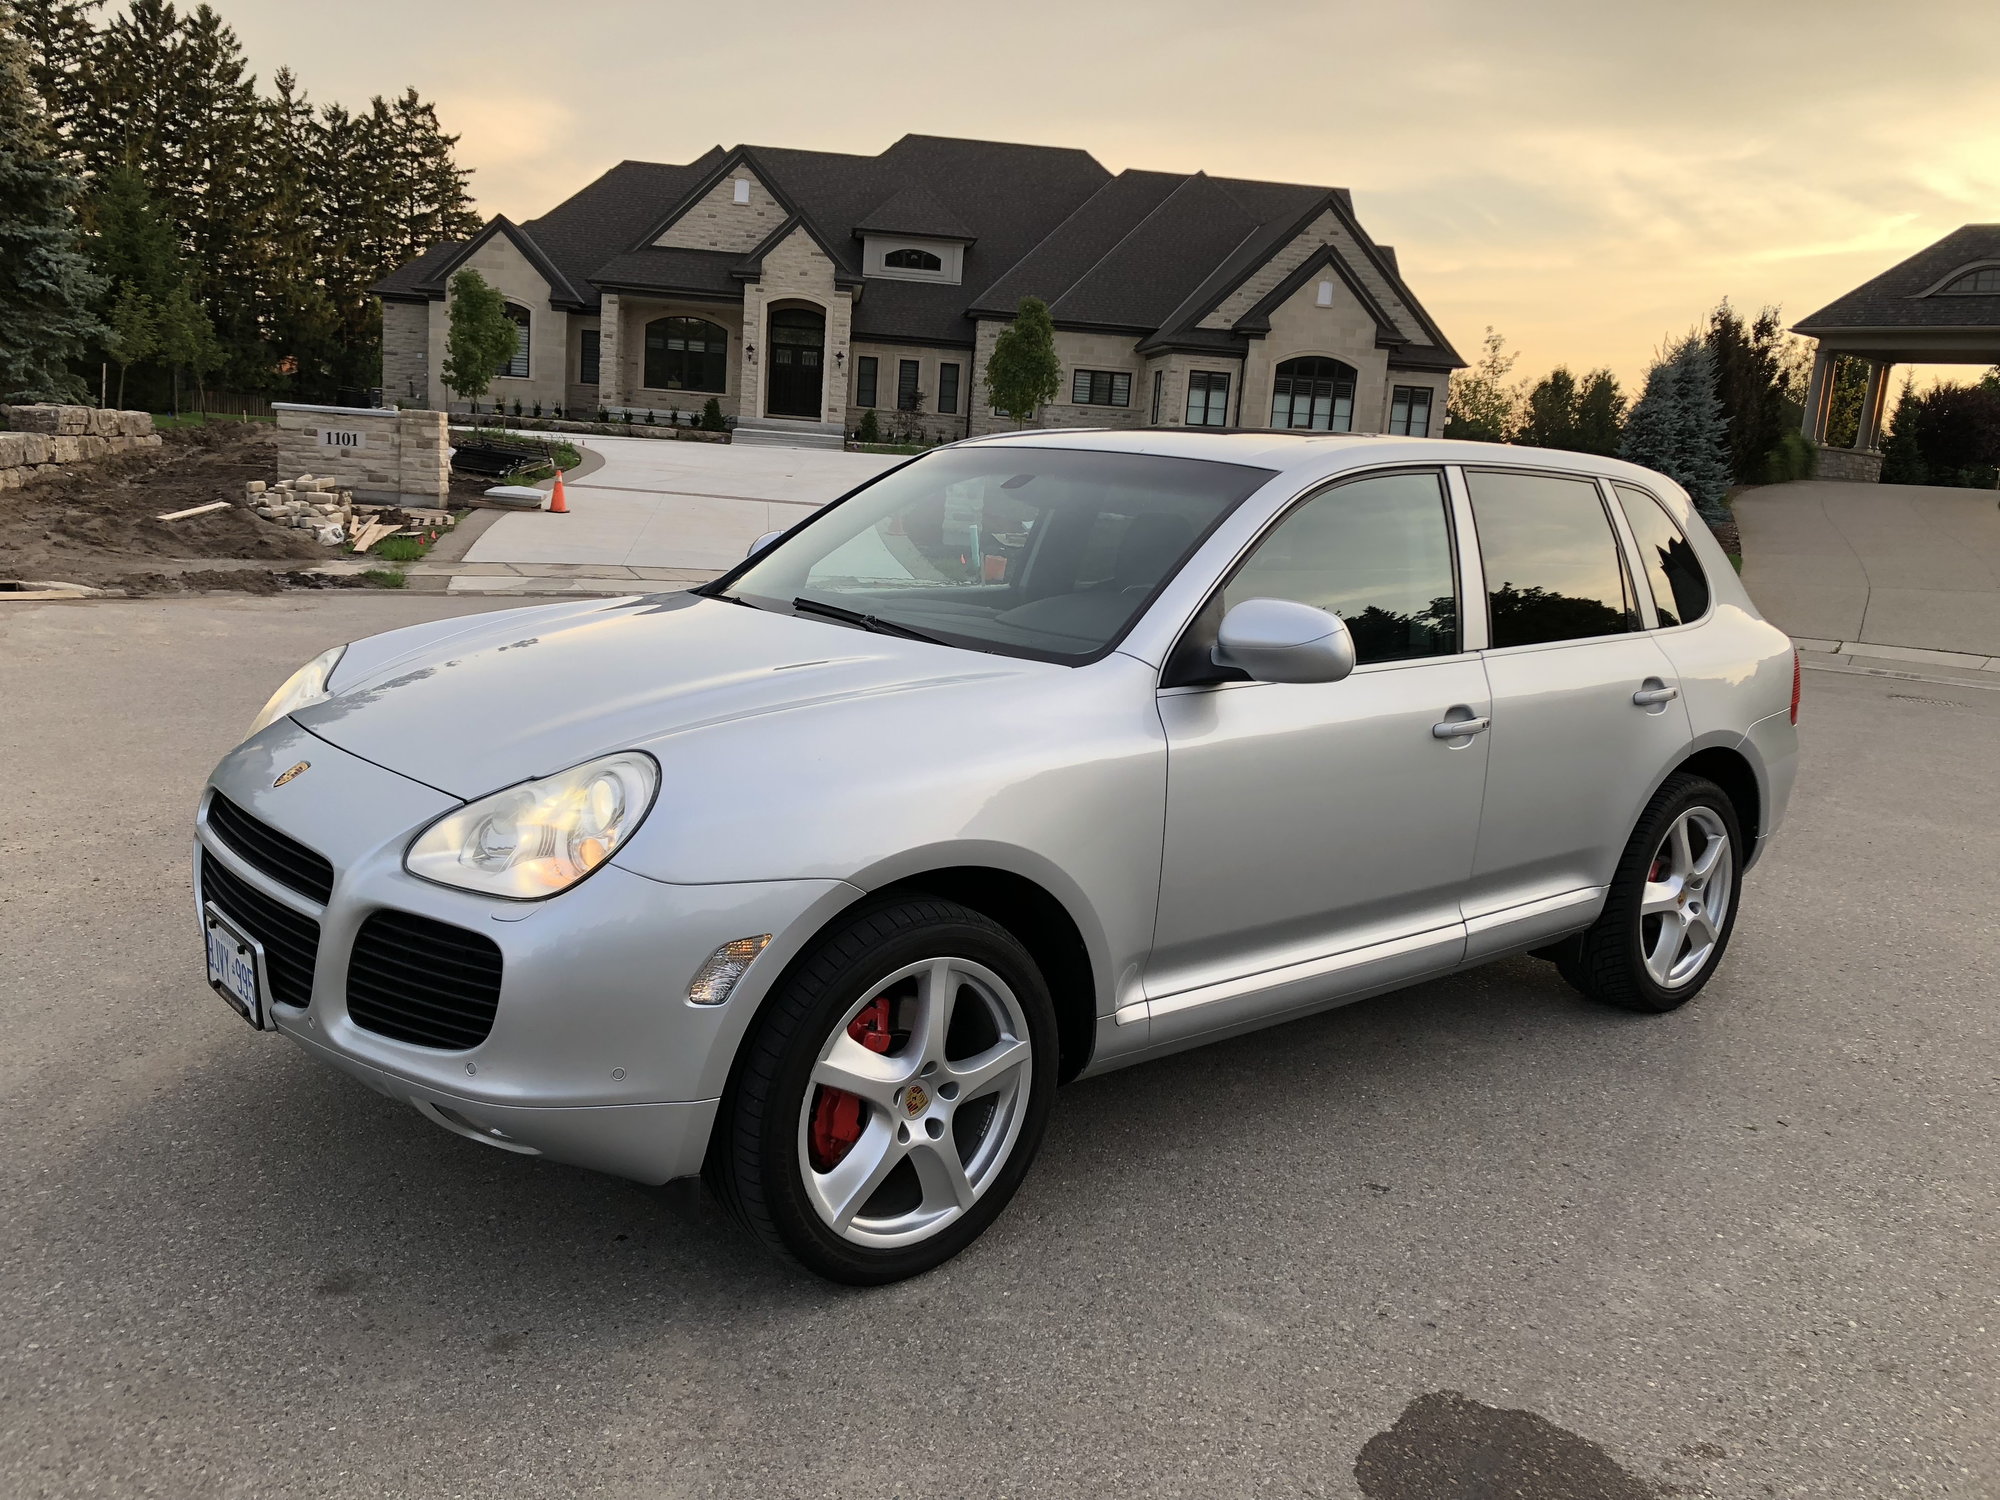 2004 Porsche Cayenne Turbo Prev. Owned by Jerry Seinfeld